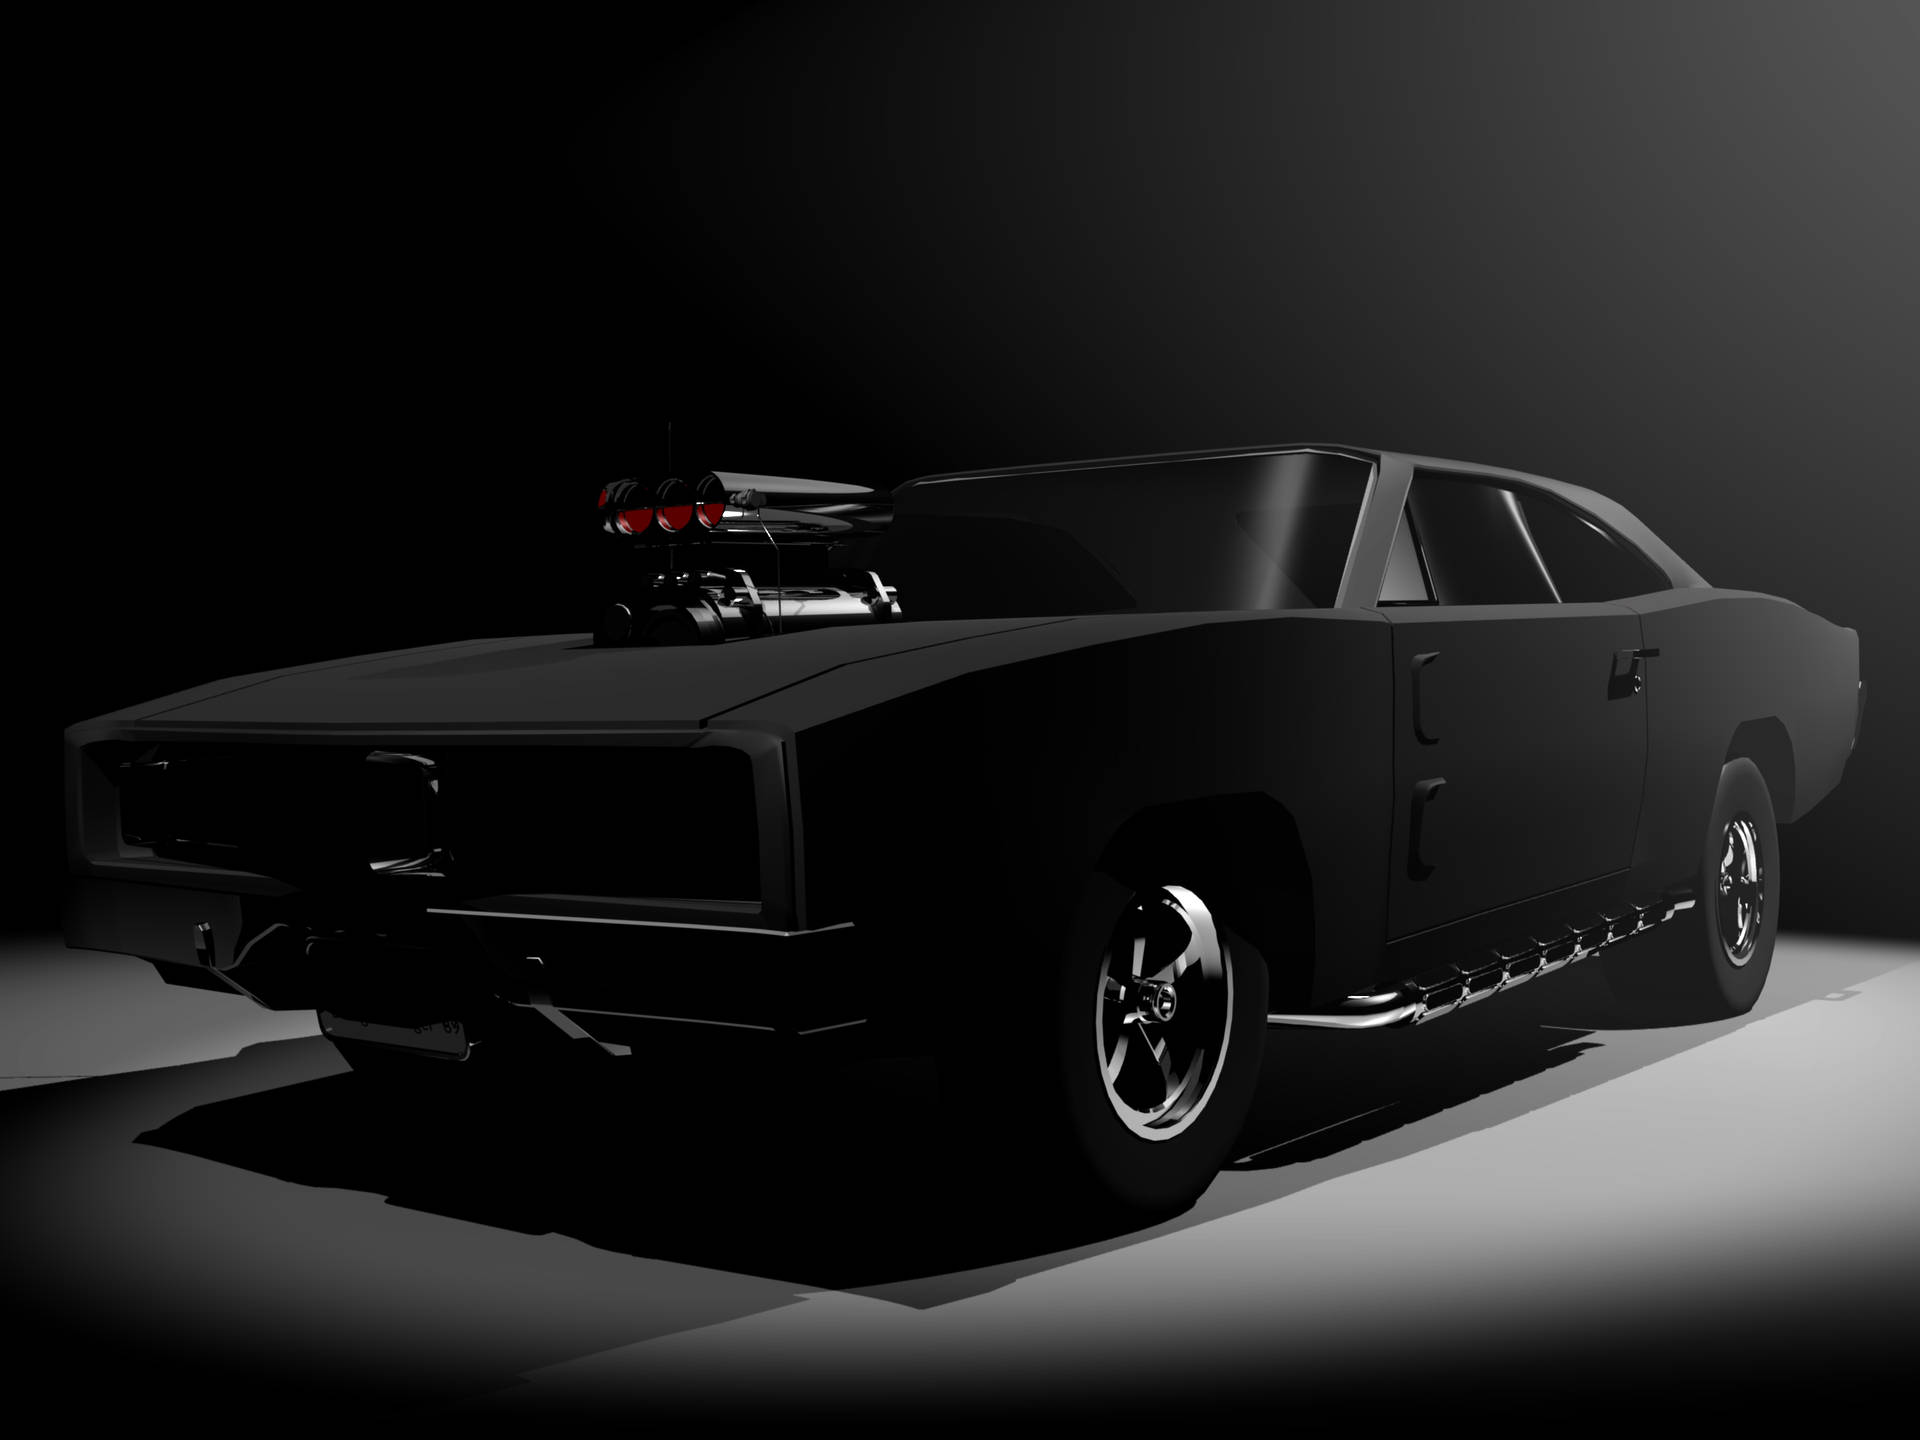 Classic Power - 1969 Dodge Charger Background